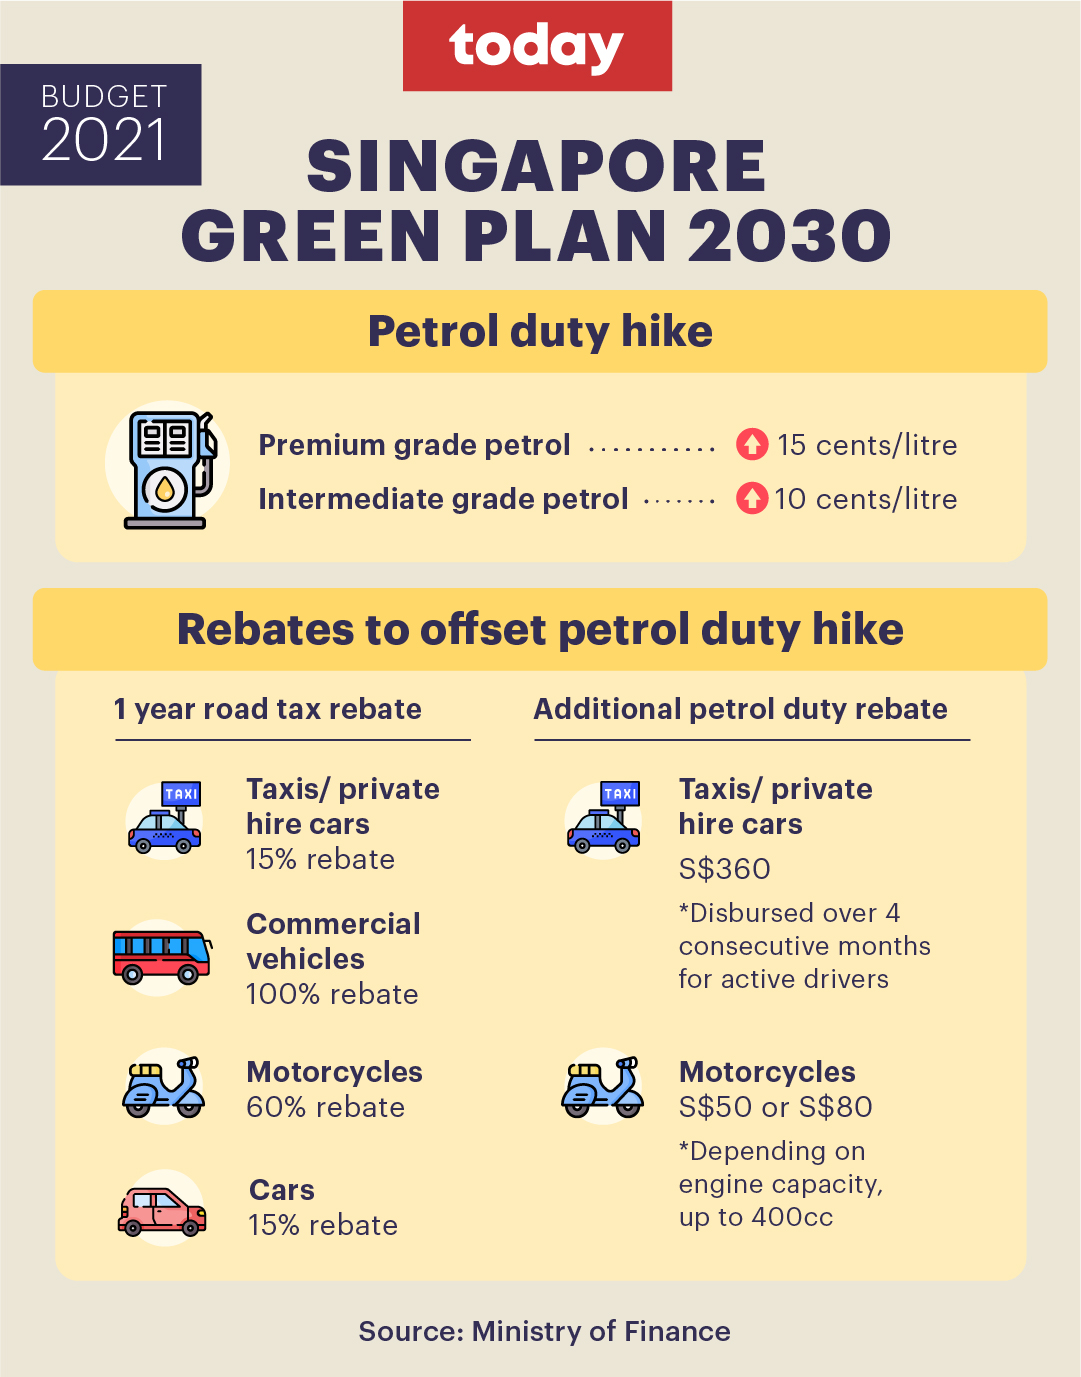 hiked petrol duty rates in Singapore